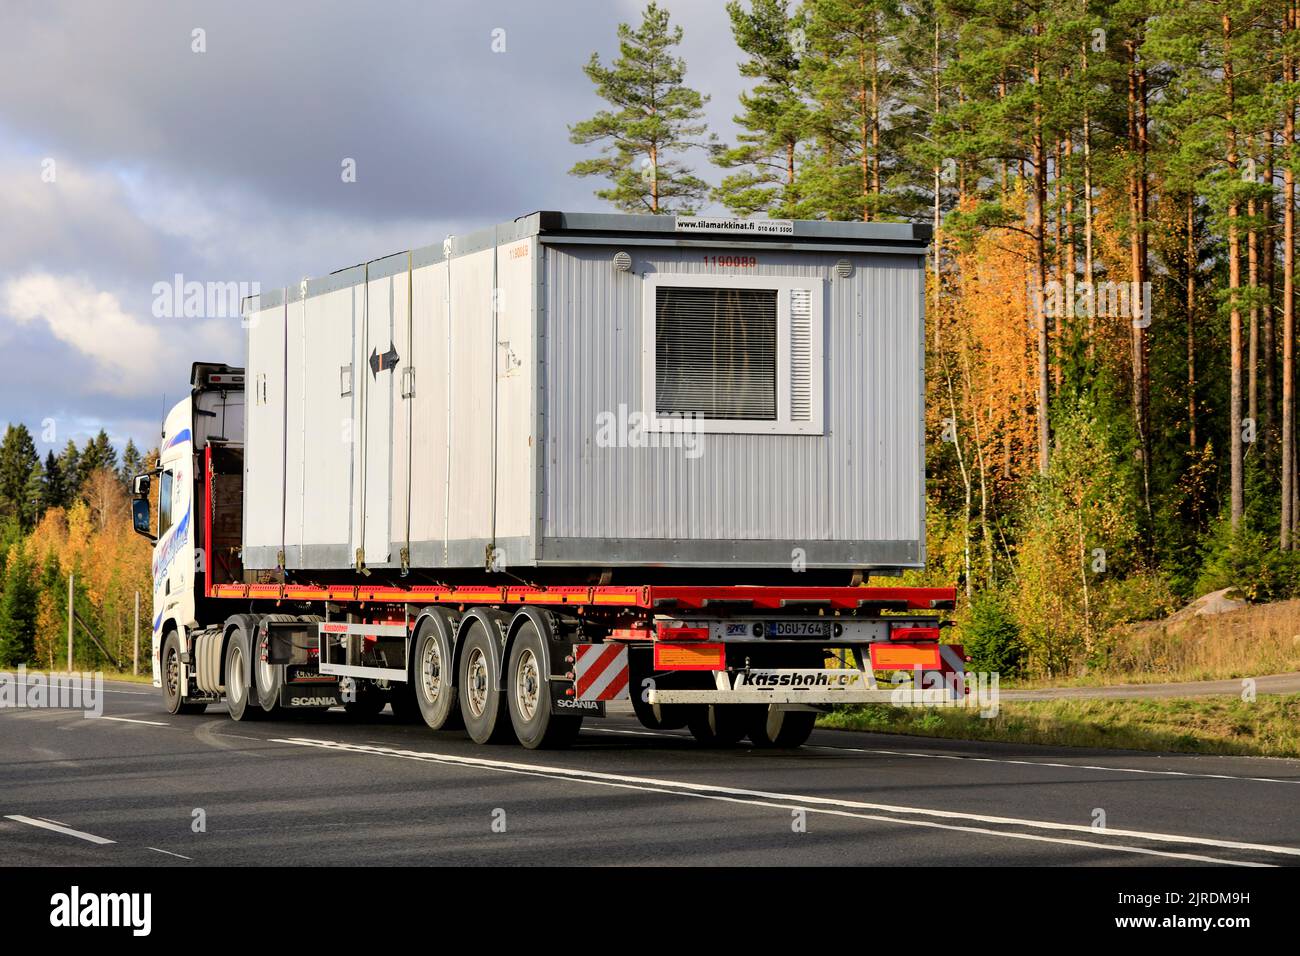 Truck hauls portable cabin on flatbed trailer along highway 2 on a sunny day of autumn, rear view. Lohja, Finland. October 16, 2020. Stock Photo